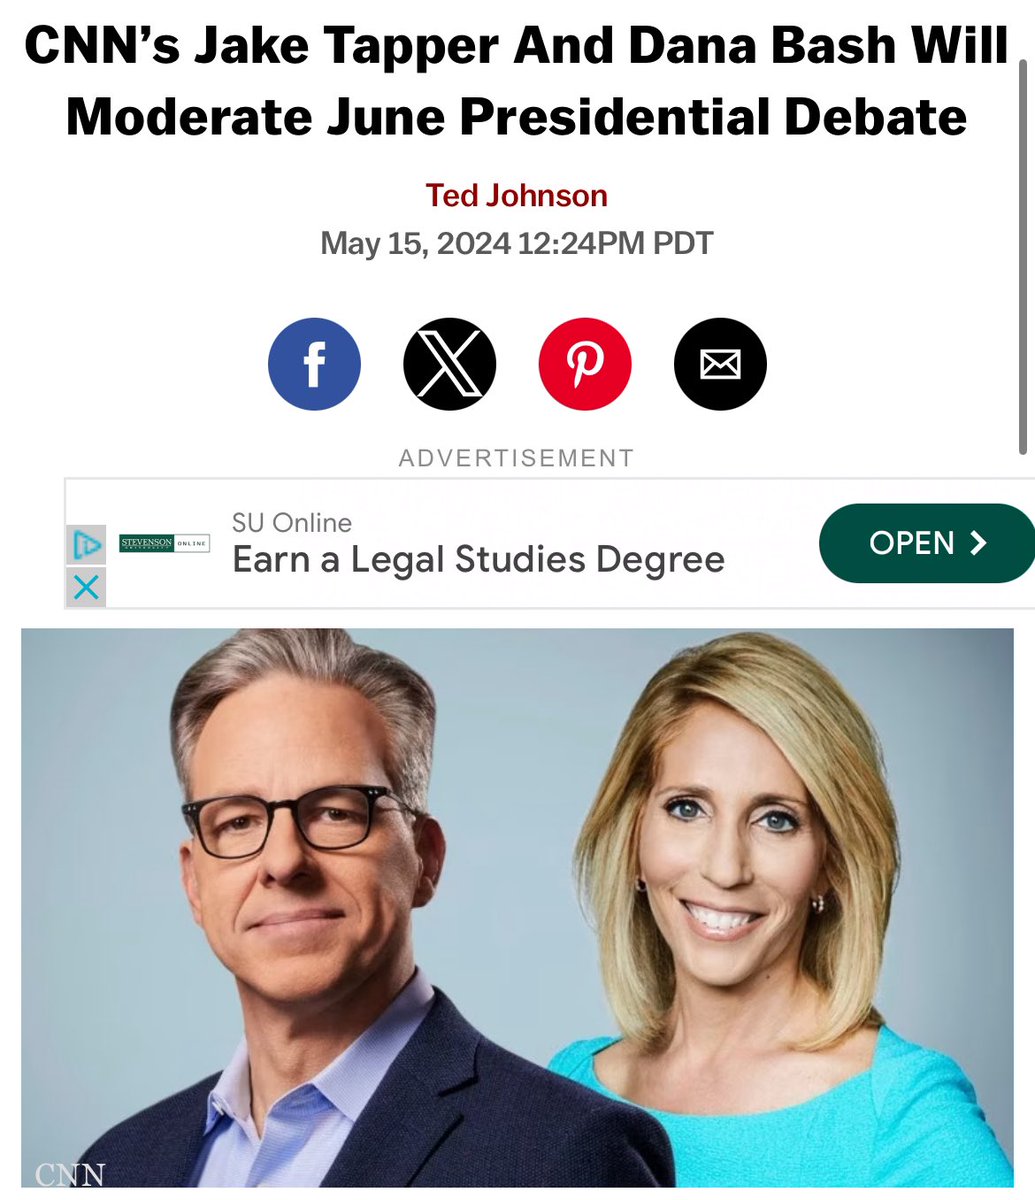 Dana Bash and Jake Tapper, CNN’s top two Jewish supremacists who manufactured consent for Israel genocide in the days after 10/7, were chosen to moderate the first presidential debate Joe Biden, the president who presides over the genocide, will debate Donald Trump and RFK Jr,